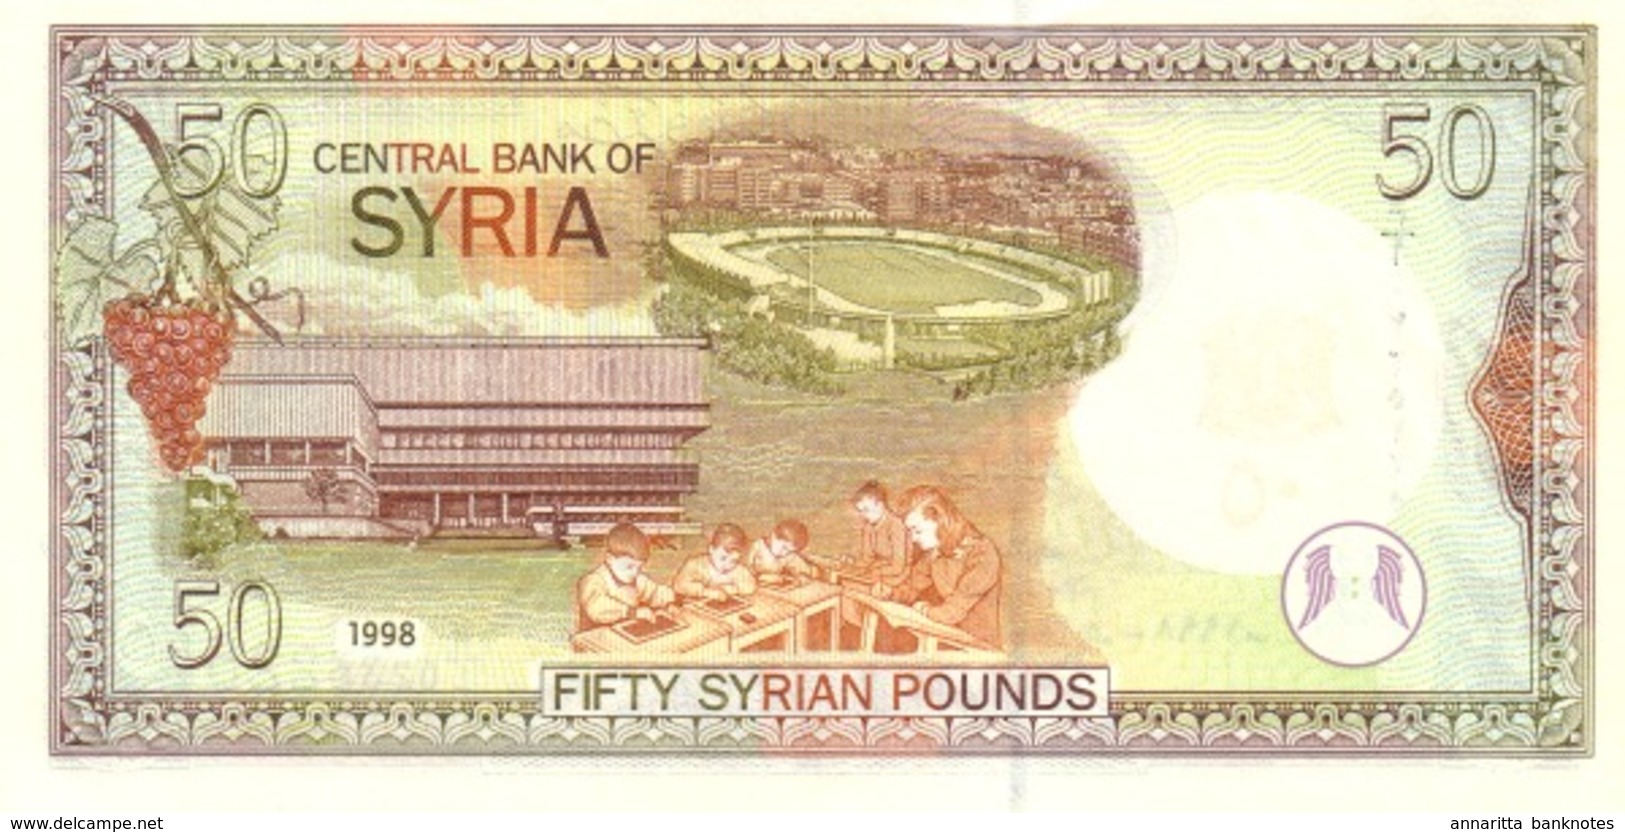 SYRIA 50 SYRIAN POUNDS 1998 P-107 UNC  [SY621a] - Syria